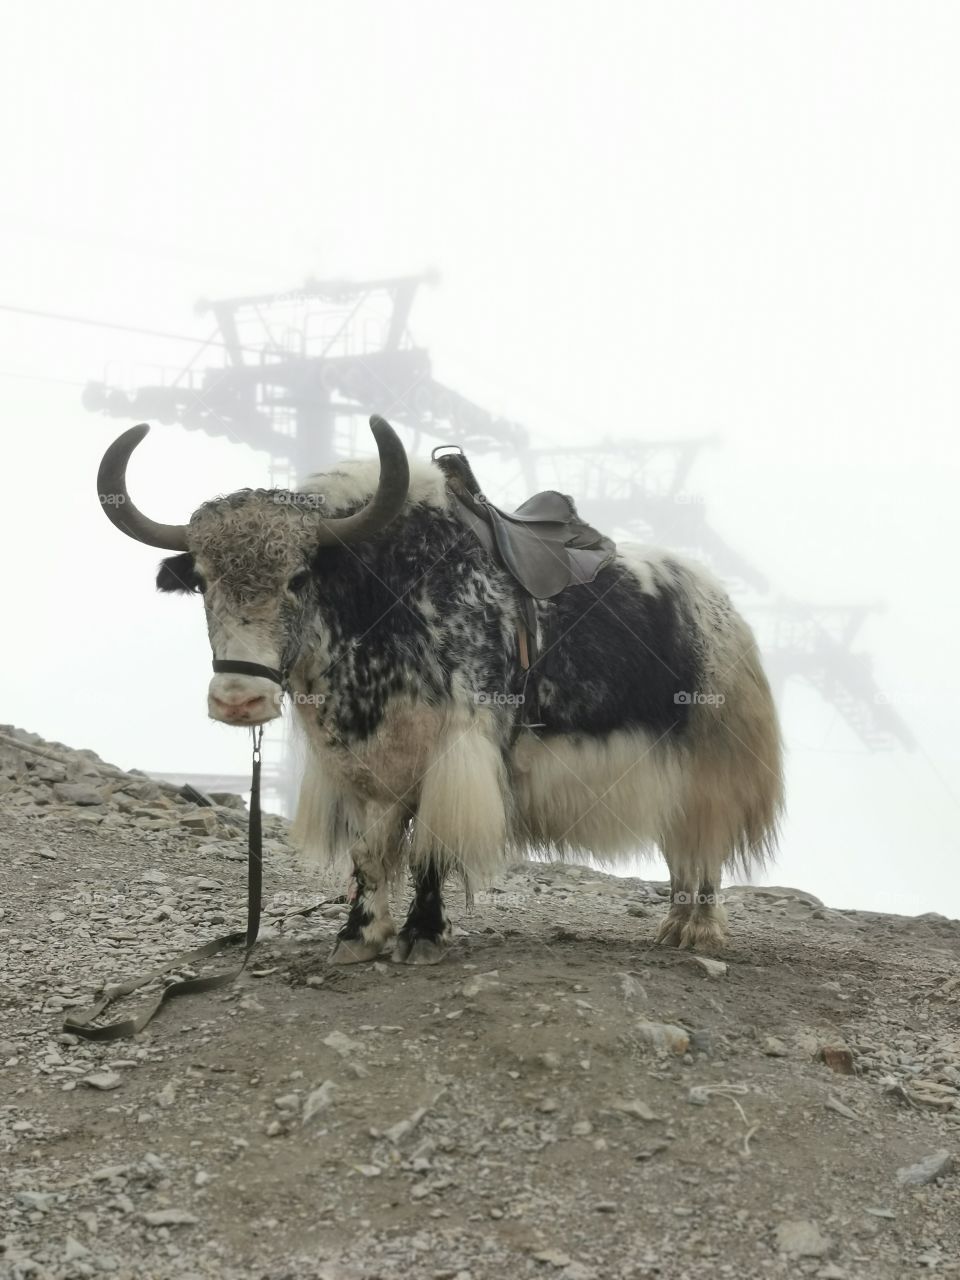 Mountains ground outside outdoor beauty nature view eco focus day travel Light wild sky clouds moody fog foggy milky trip traveling grunting ox yak sarlac yock